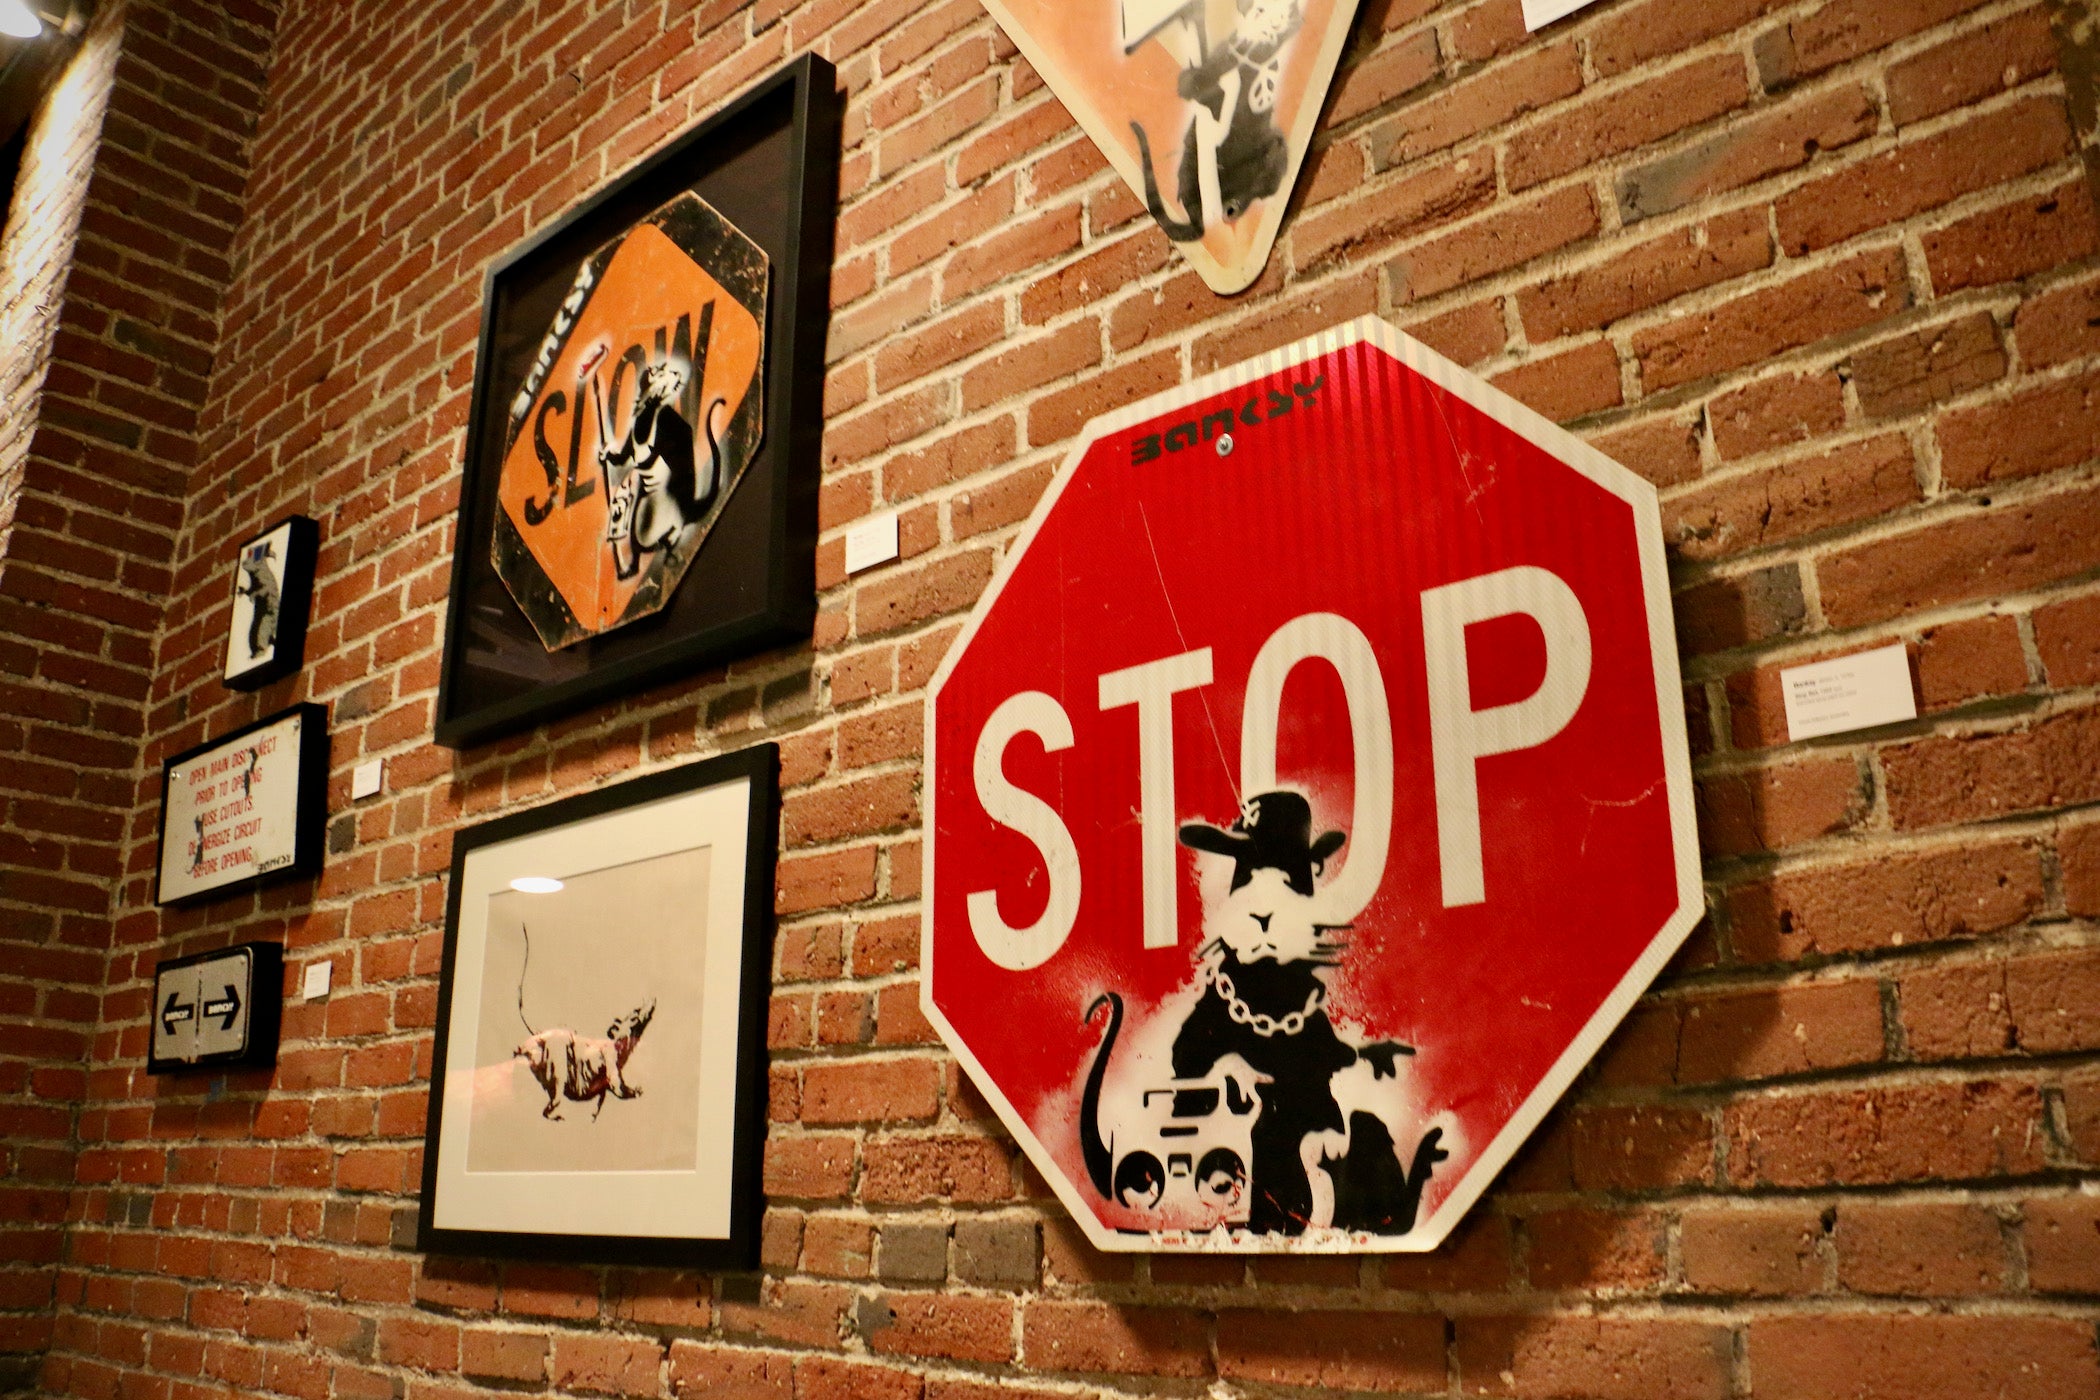 Banksy, Biography, Art, Auction, Shredded Painting, & Facts